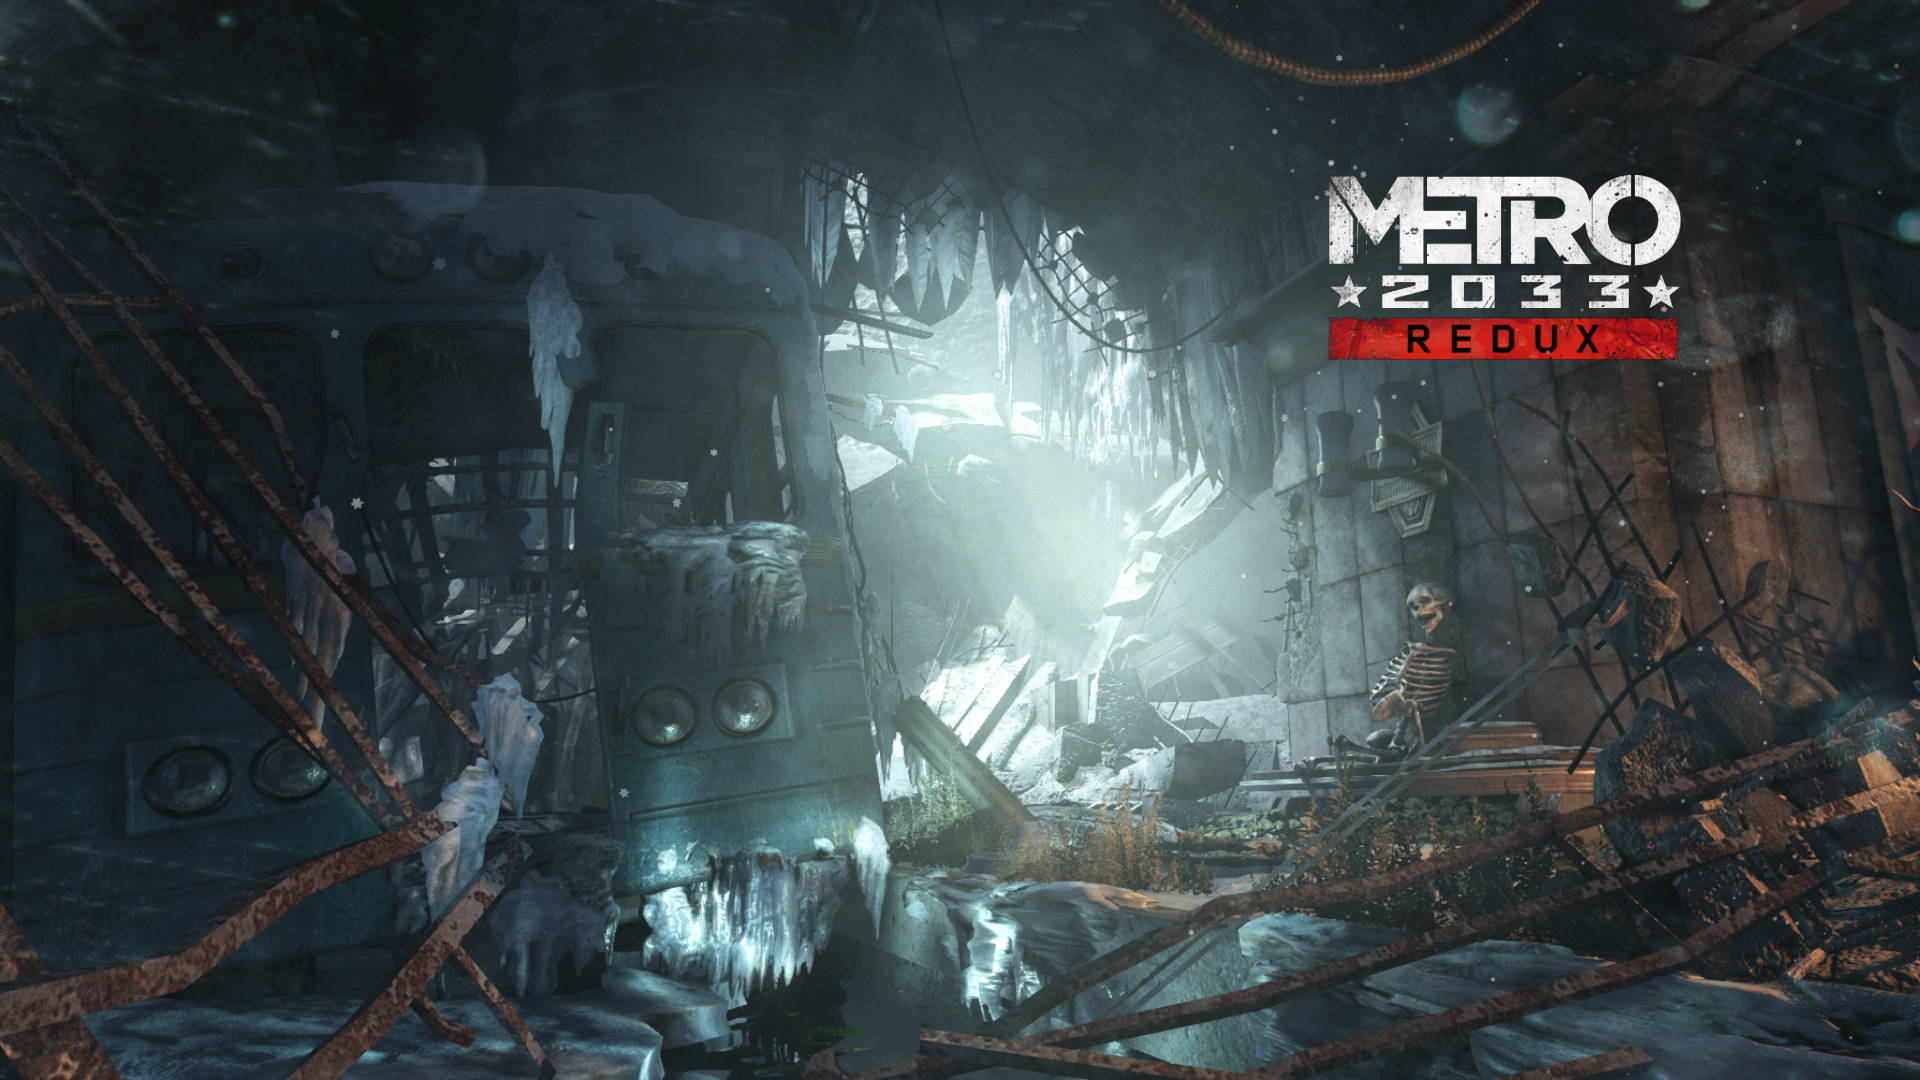 Metro2033 Vinter Tunnel - This Would Be The Translation For 